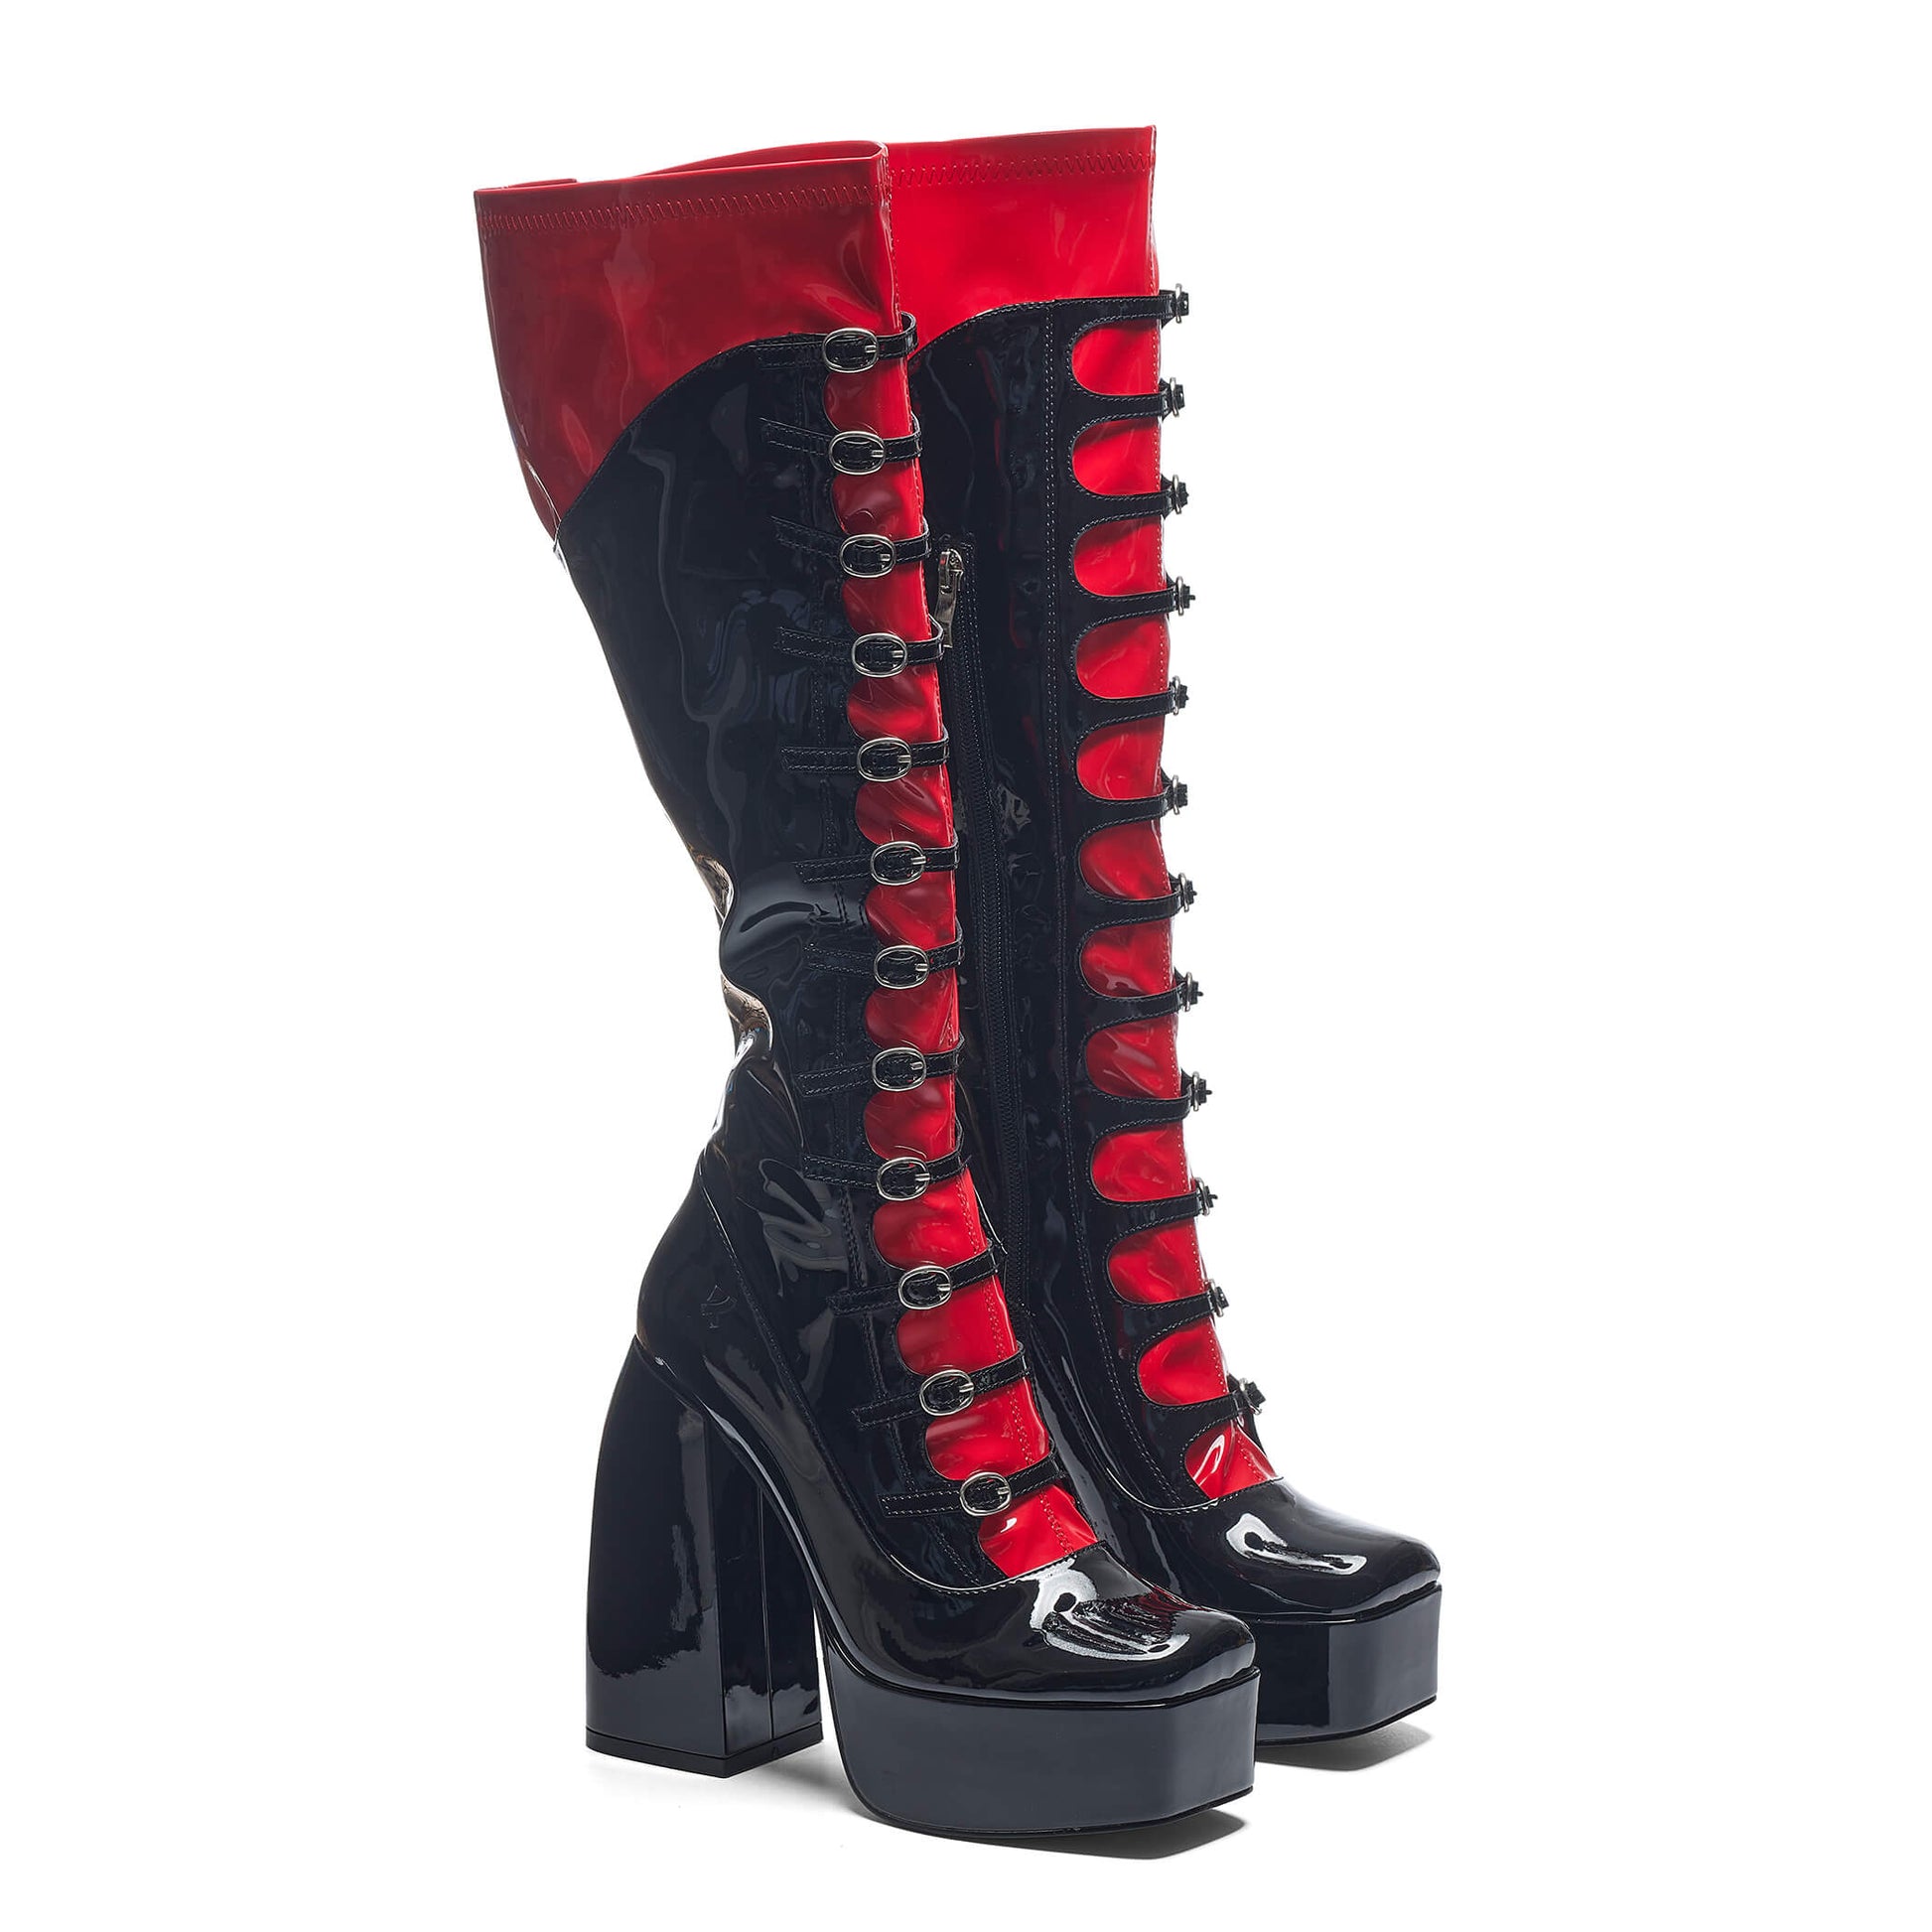 Ritual State Patent Long Boots - Red - Long Boots - KOI Footwear - Red - Three-Quarter View